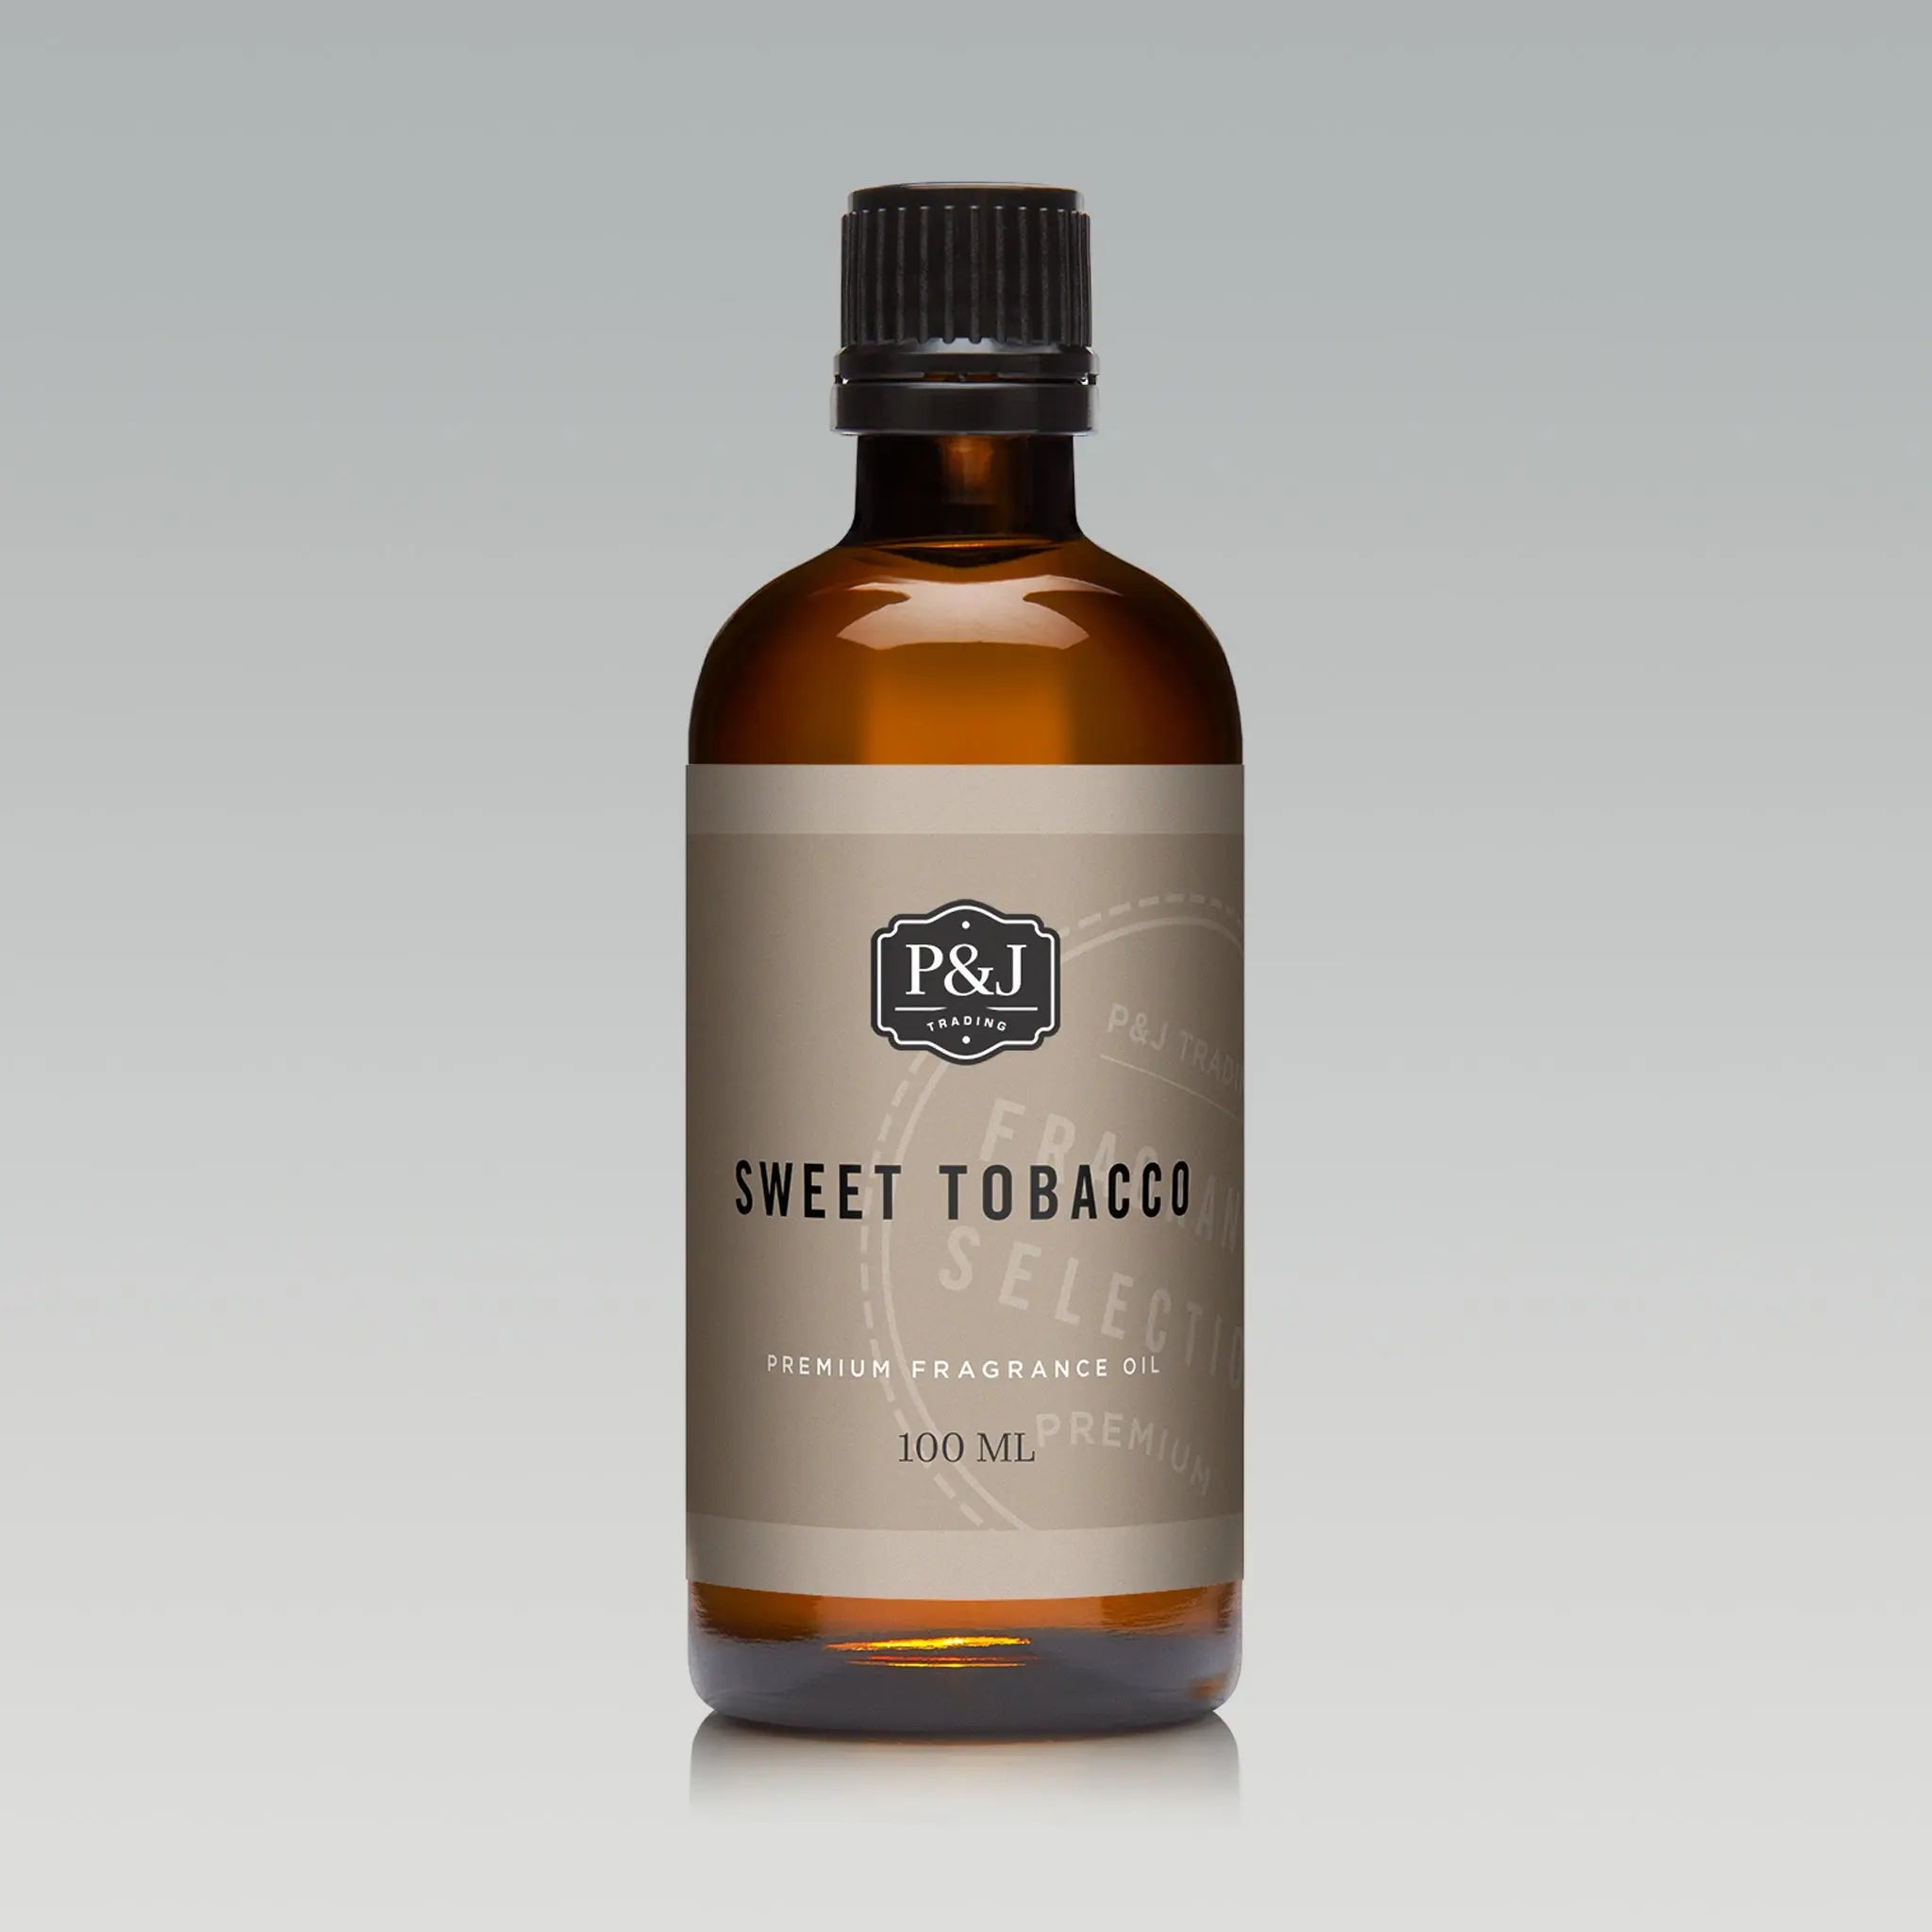 Sweet Tobacco Fragrance Oil | 4 fl oz (118ml) | Premium Grade | for  Diffusers, Candle and Soap Making, DIY Projects & More | by Horbaach |  Packaging